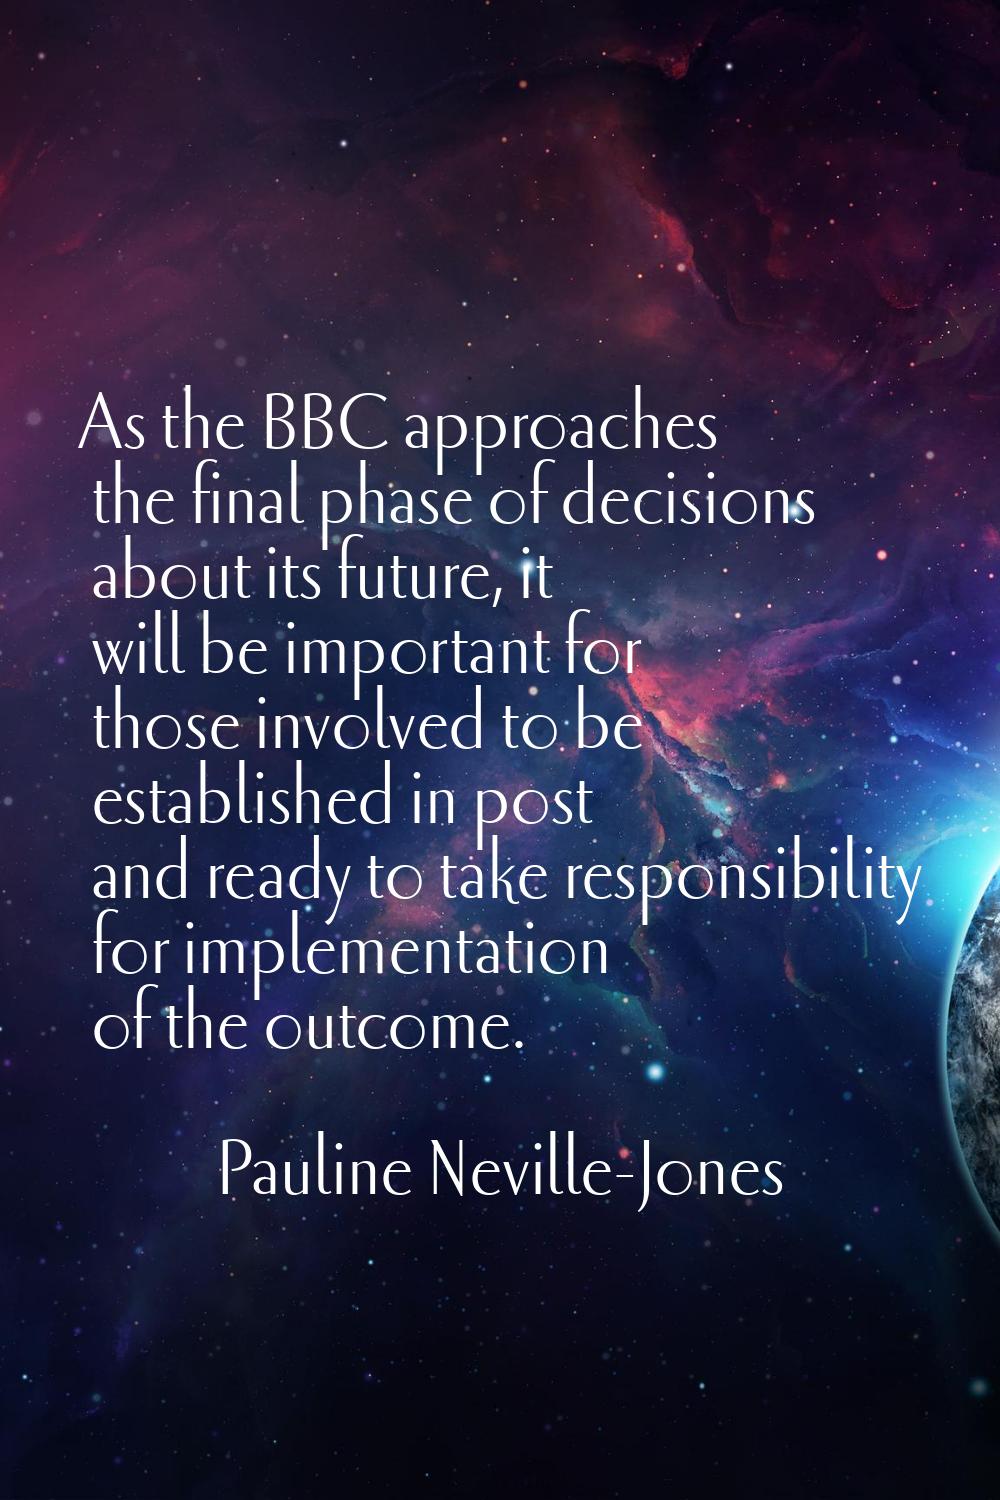 As the BBC approaches the final phase of decisions about its future, it will be important for those